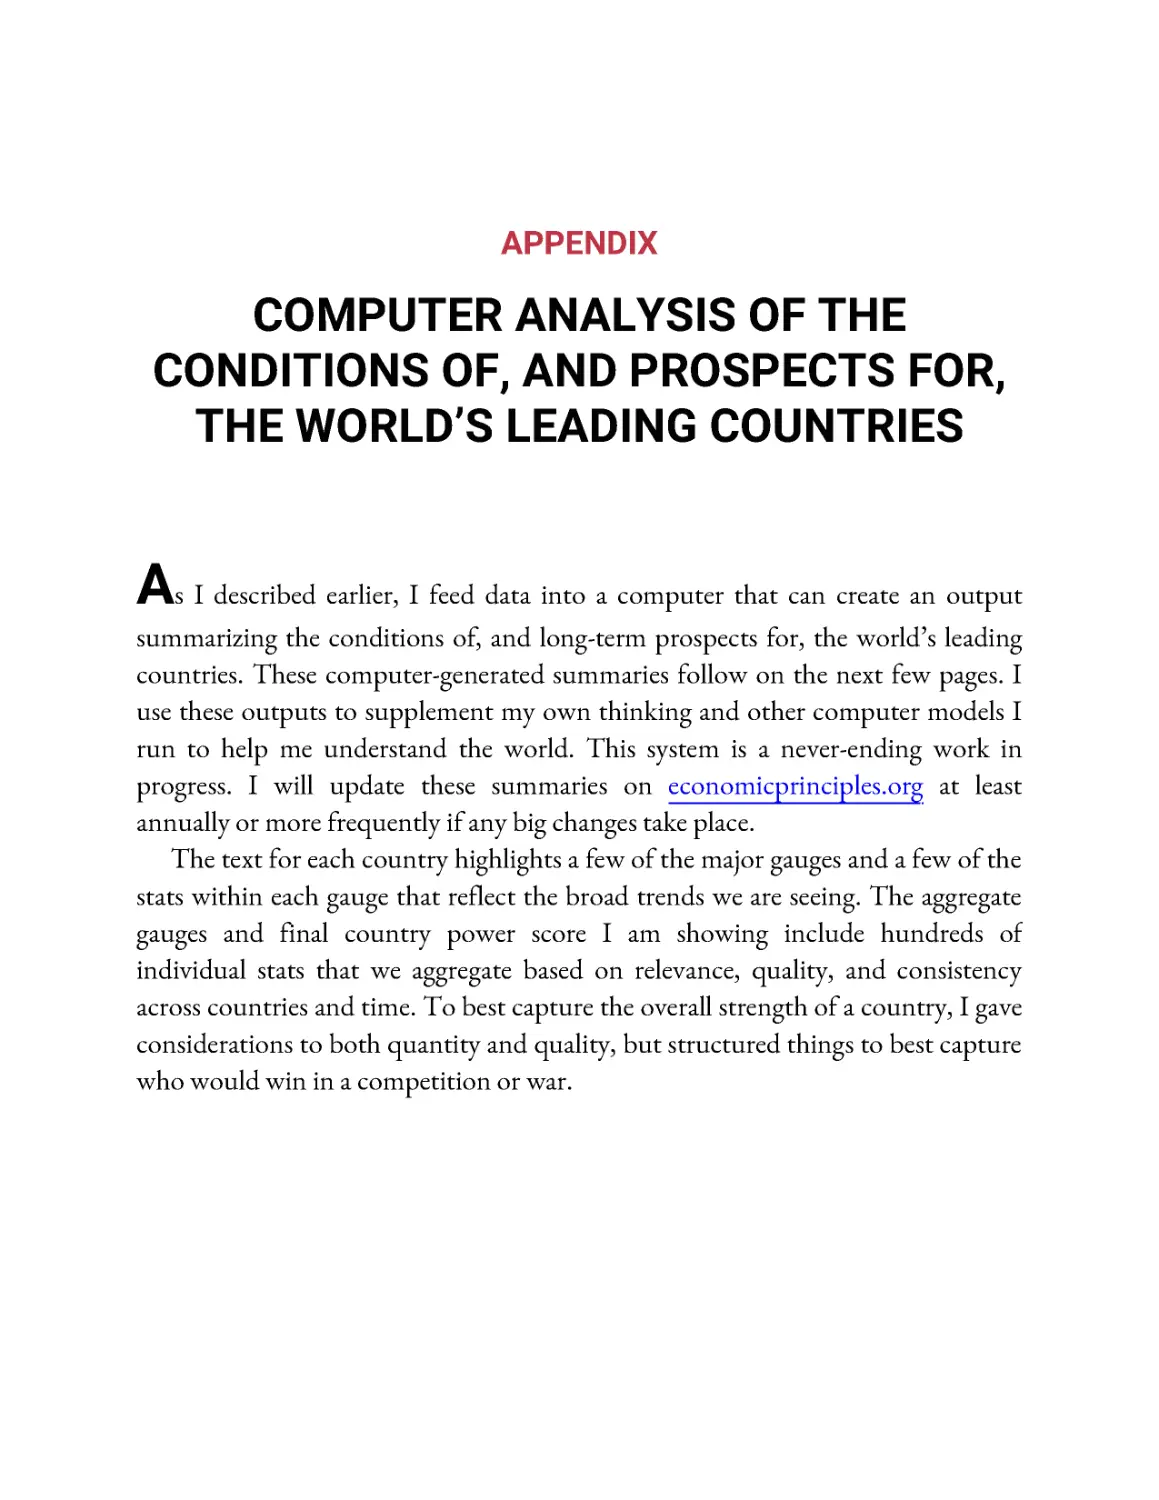 ﻿Appendix: Computer Analysis of the Conditions of, and Prospects for, the World’s Leading Countrie